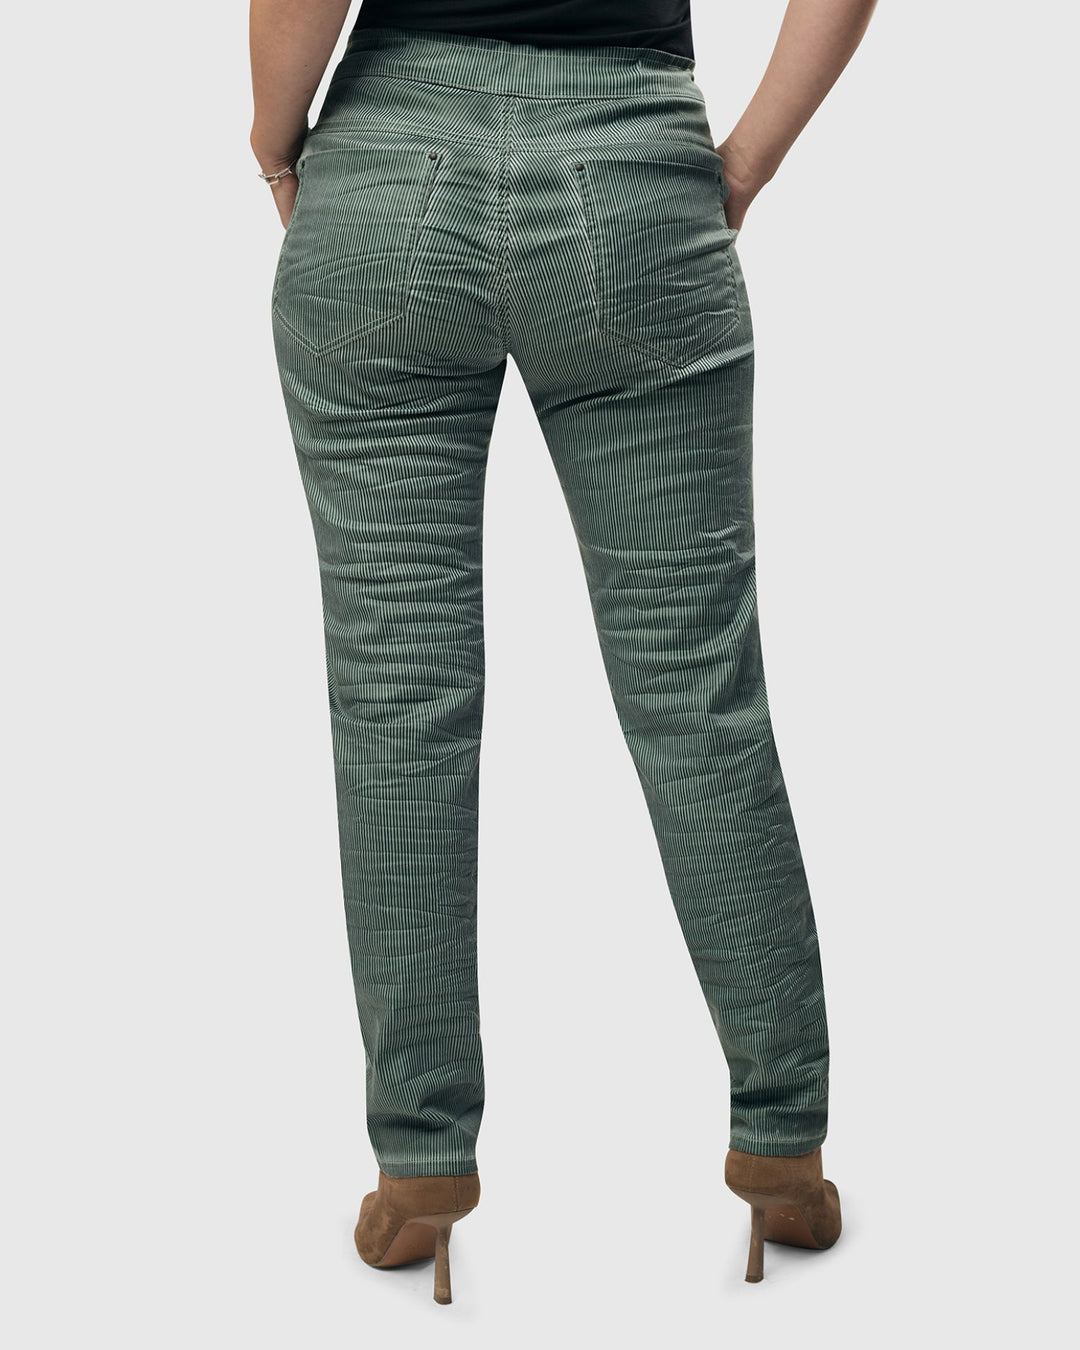 Pinstripe Iconic Stretch Jeans, Teal